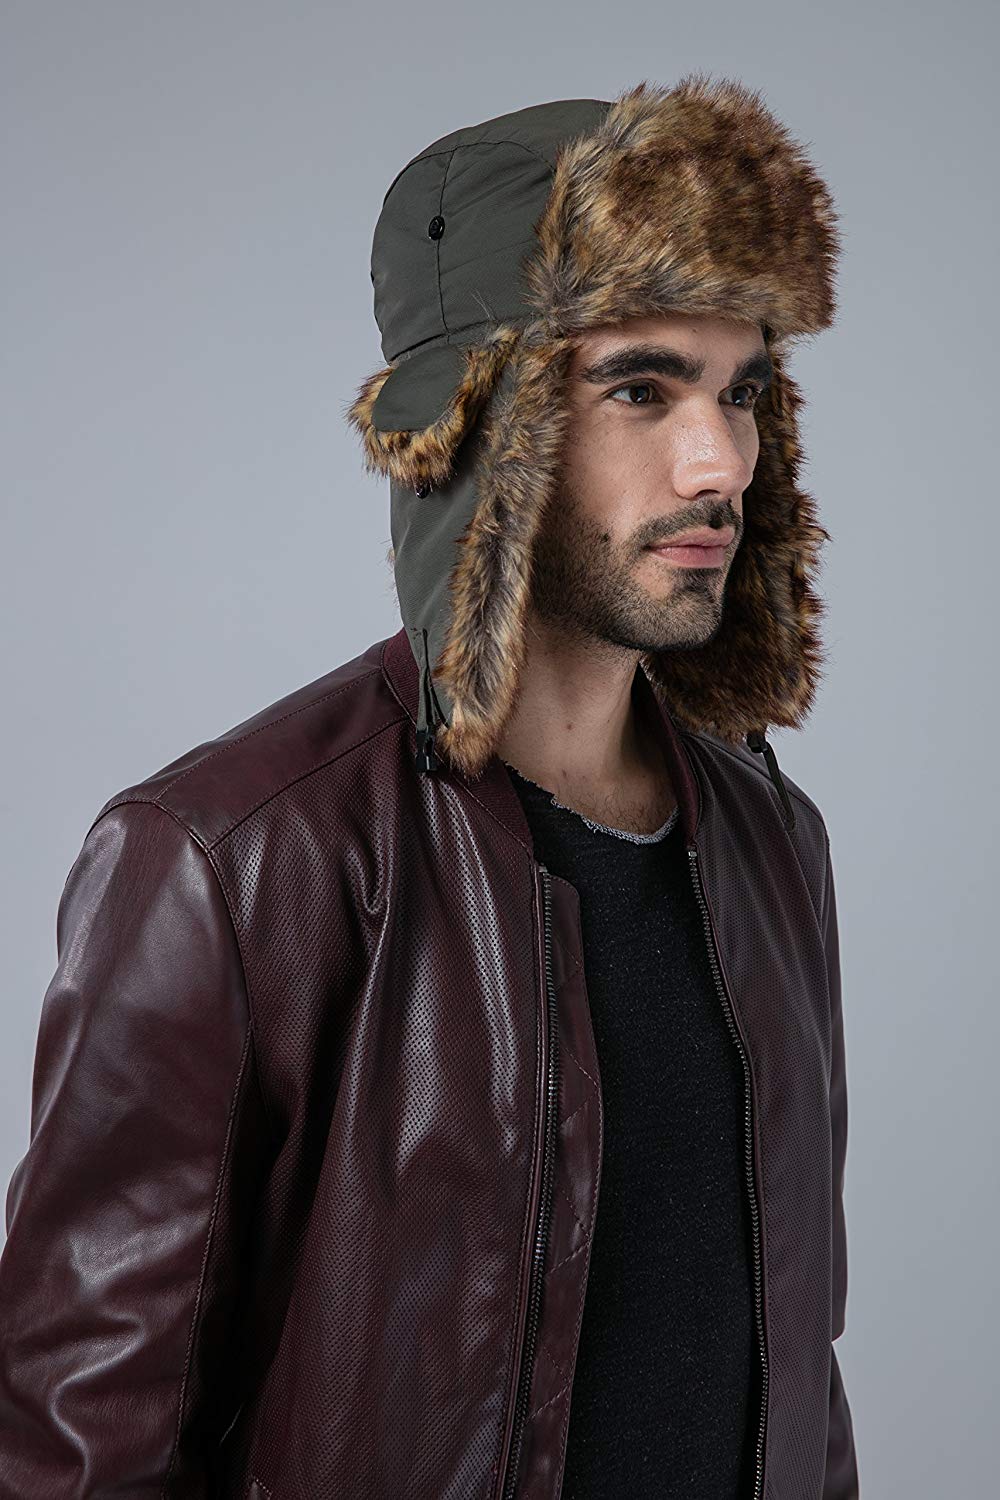 What I wear: leather jacket and trapper hat